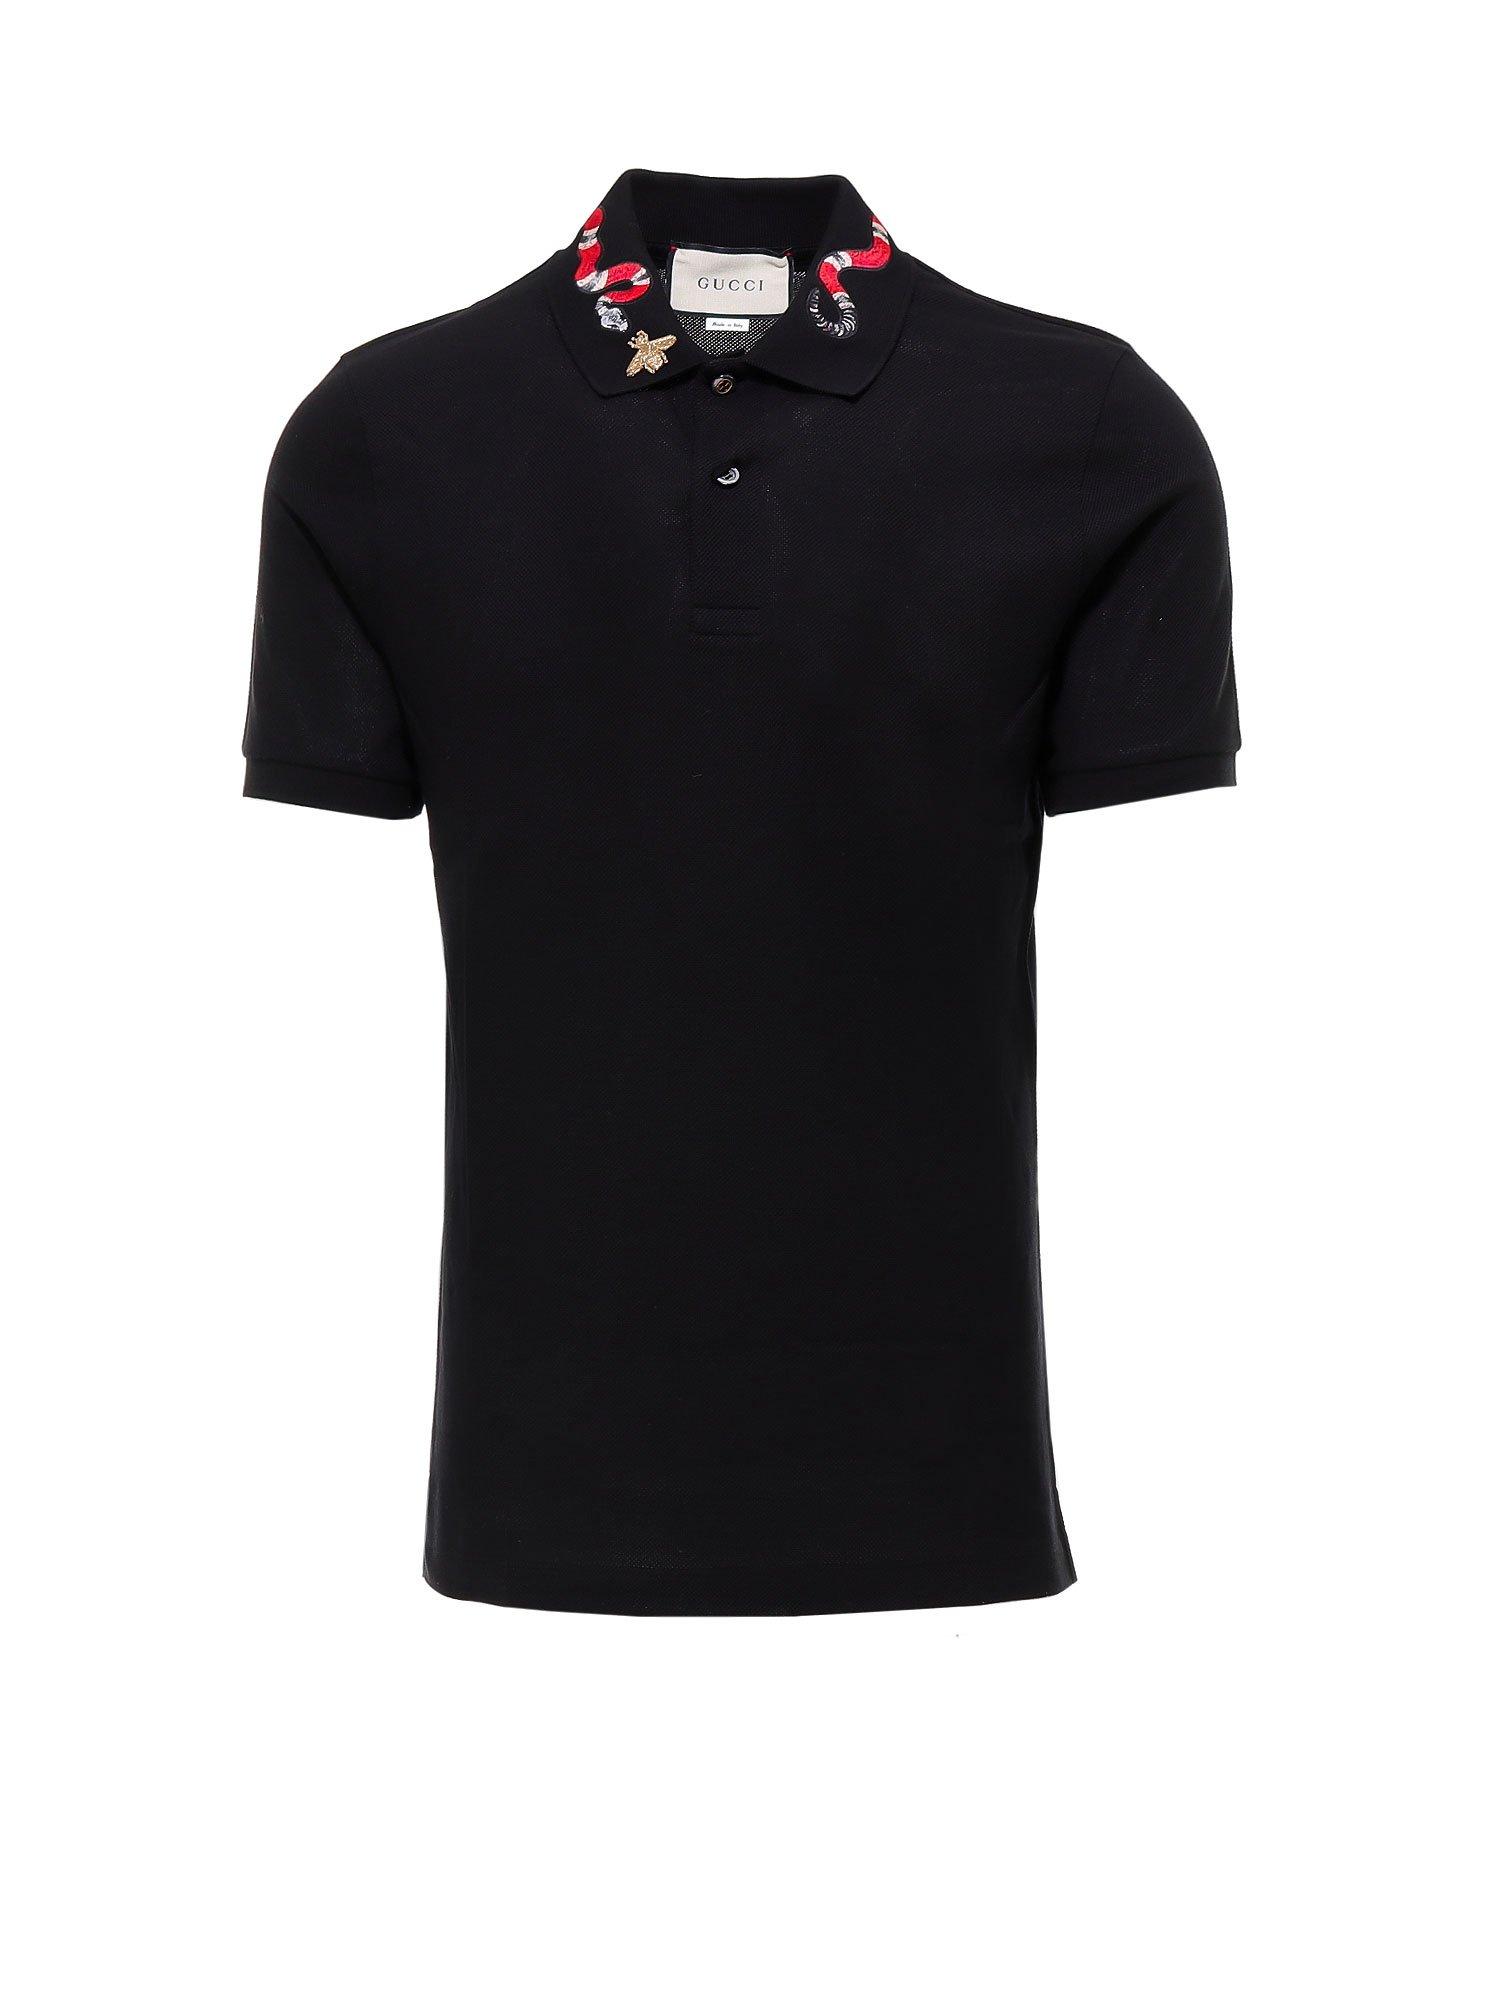 Gucci Cotton Snake Embroidered Polo Shirt in Black for Men - Lyst